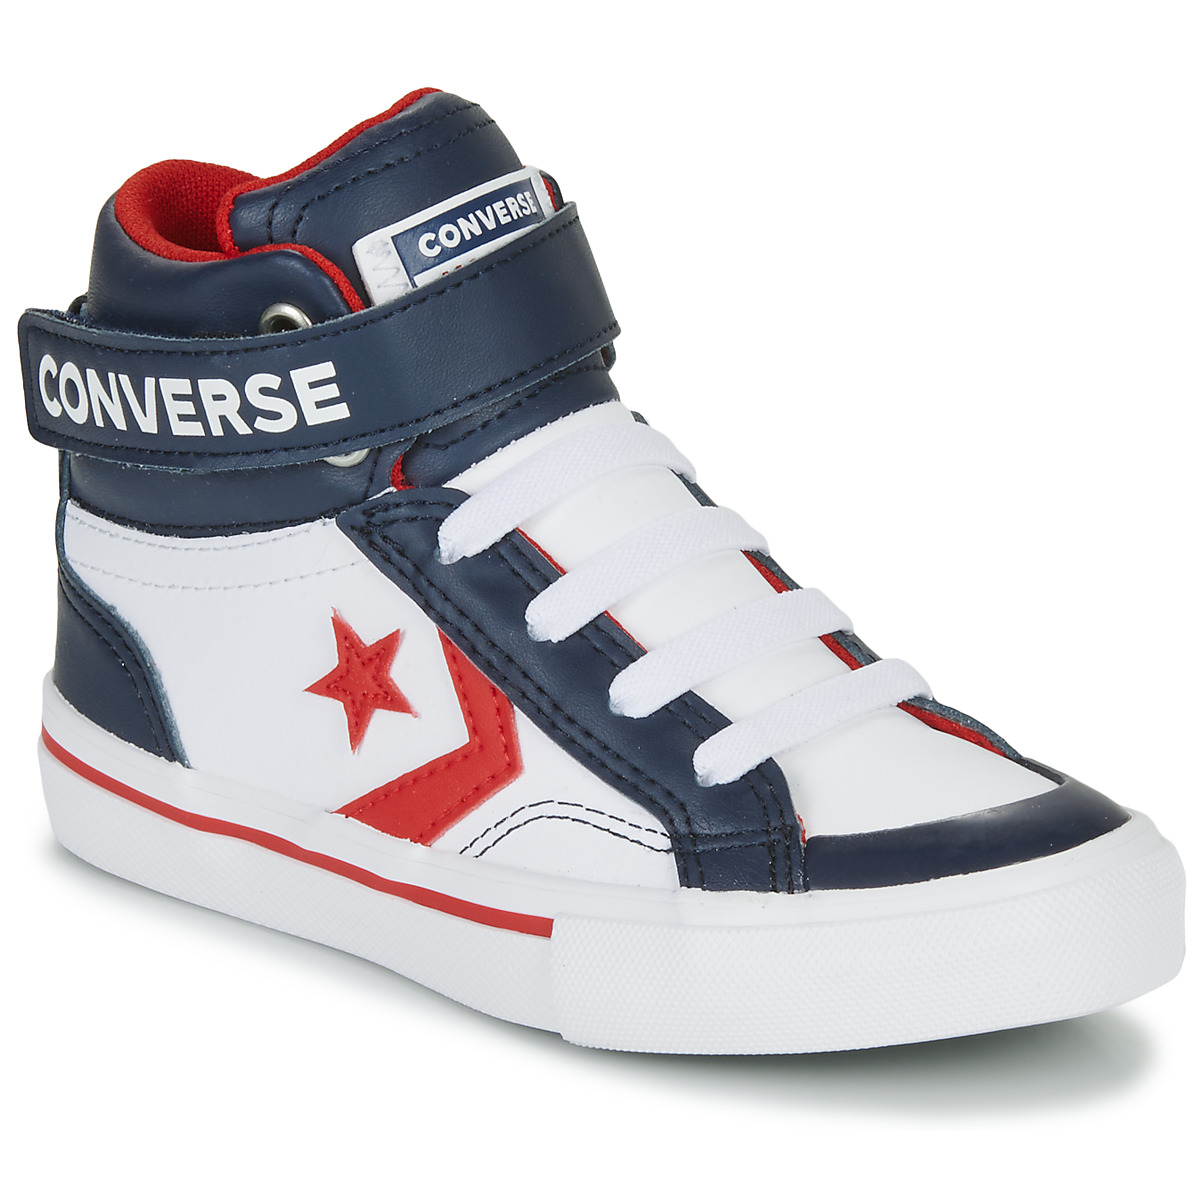 | Spartoo € 48,80 Hi Blaze Shoes ! - Strap delivery High Fast Converse trainers / top White Pro Blue Child - Europe